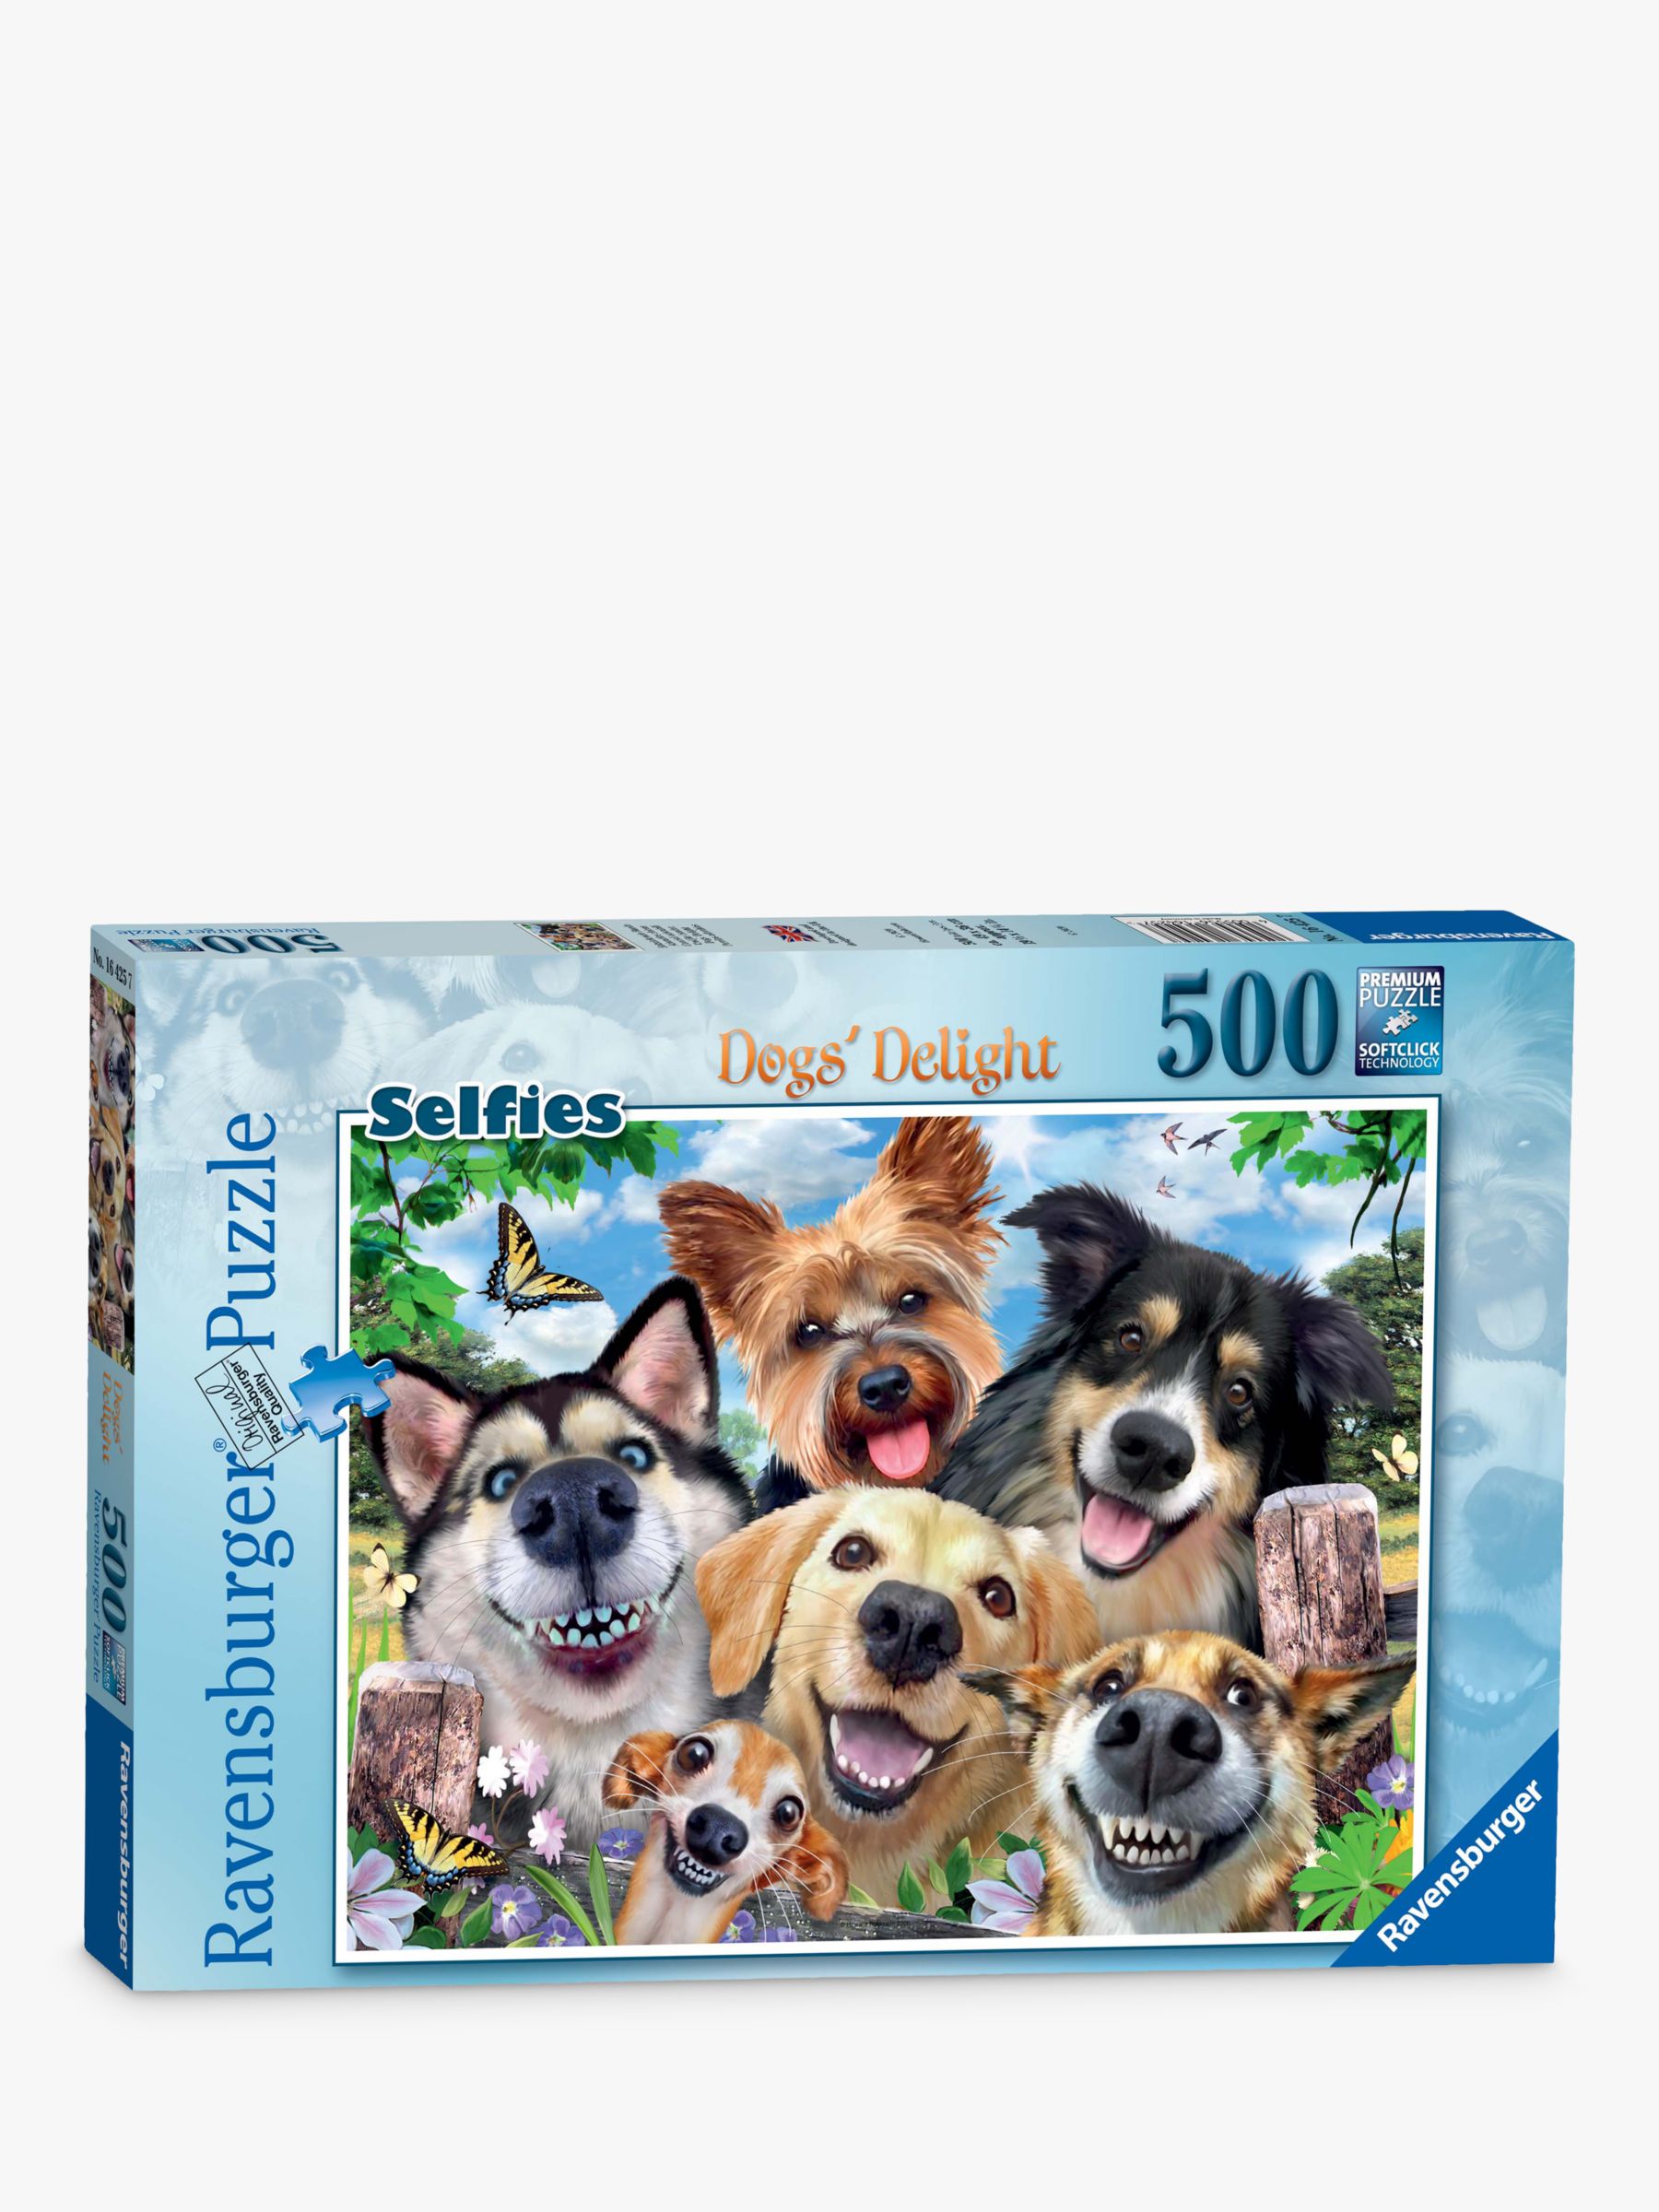 Ravensburger Selfies: Dogs' Delight Jigsaw Puzzle, 500 Pieces